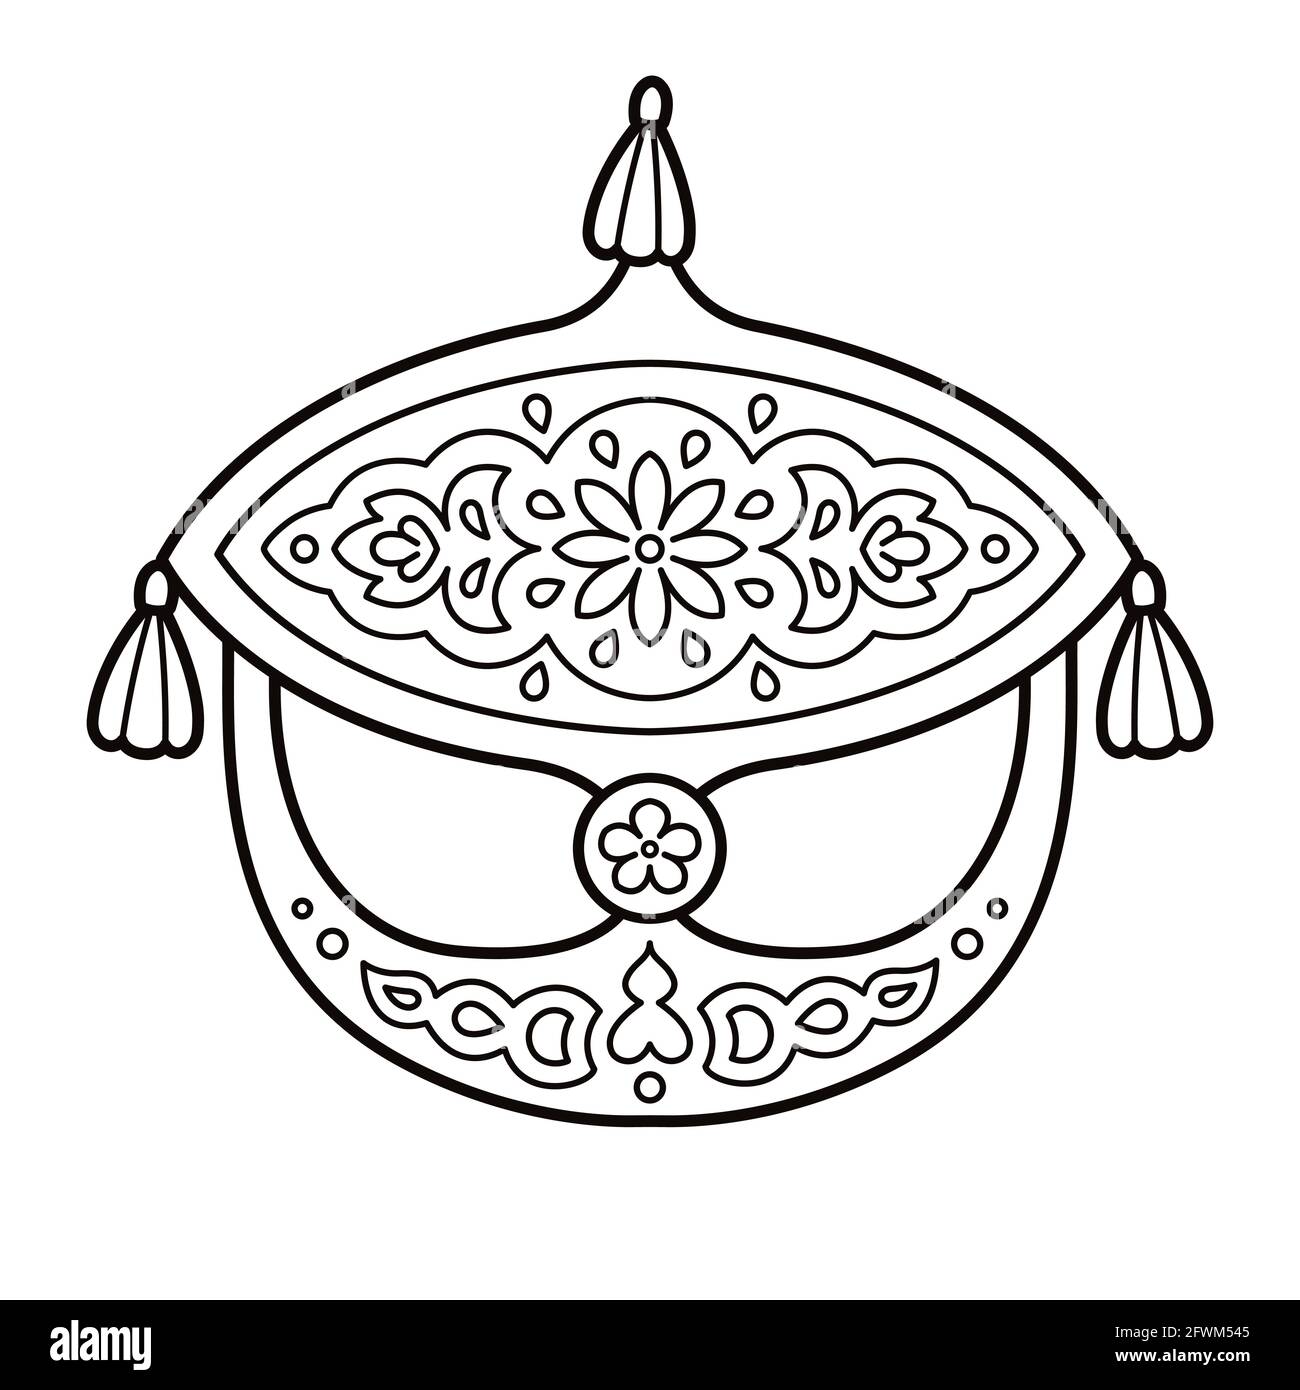 Wau Bulan, traditional Malay moon kite, symbol of Malaysia. Black and white line drawing for coloring. Vector clip art illustration. Stock Vector